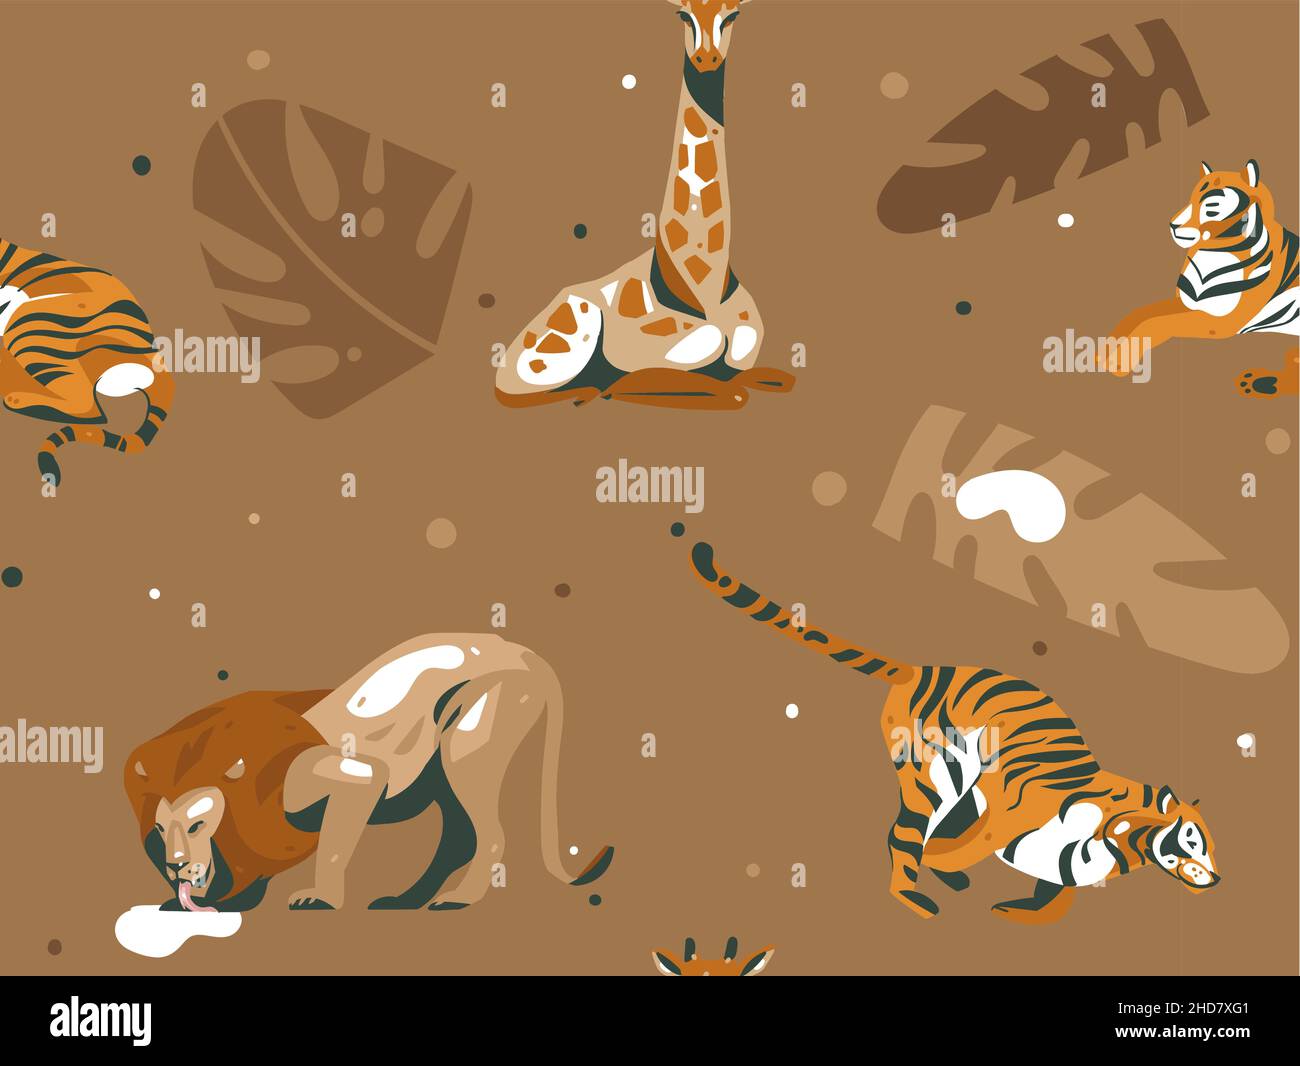 Hand drawn vector abstract cartoon modern graphic African Safari Nature illustrations art collage seamless pattern with giraffe,lion,tigers animals Stock Vector